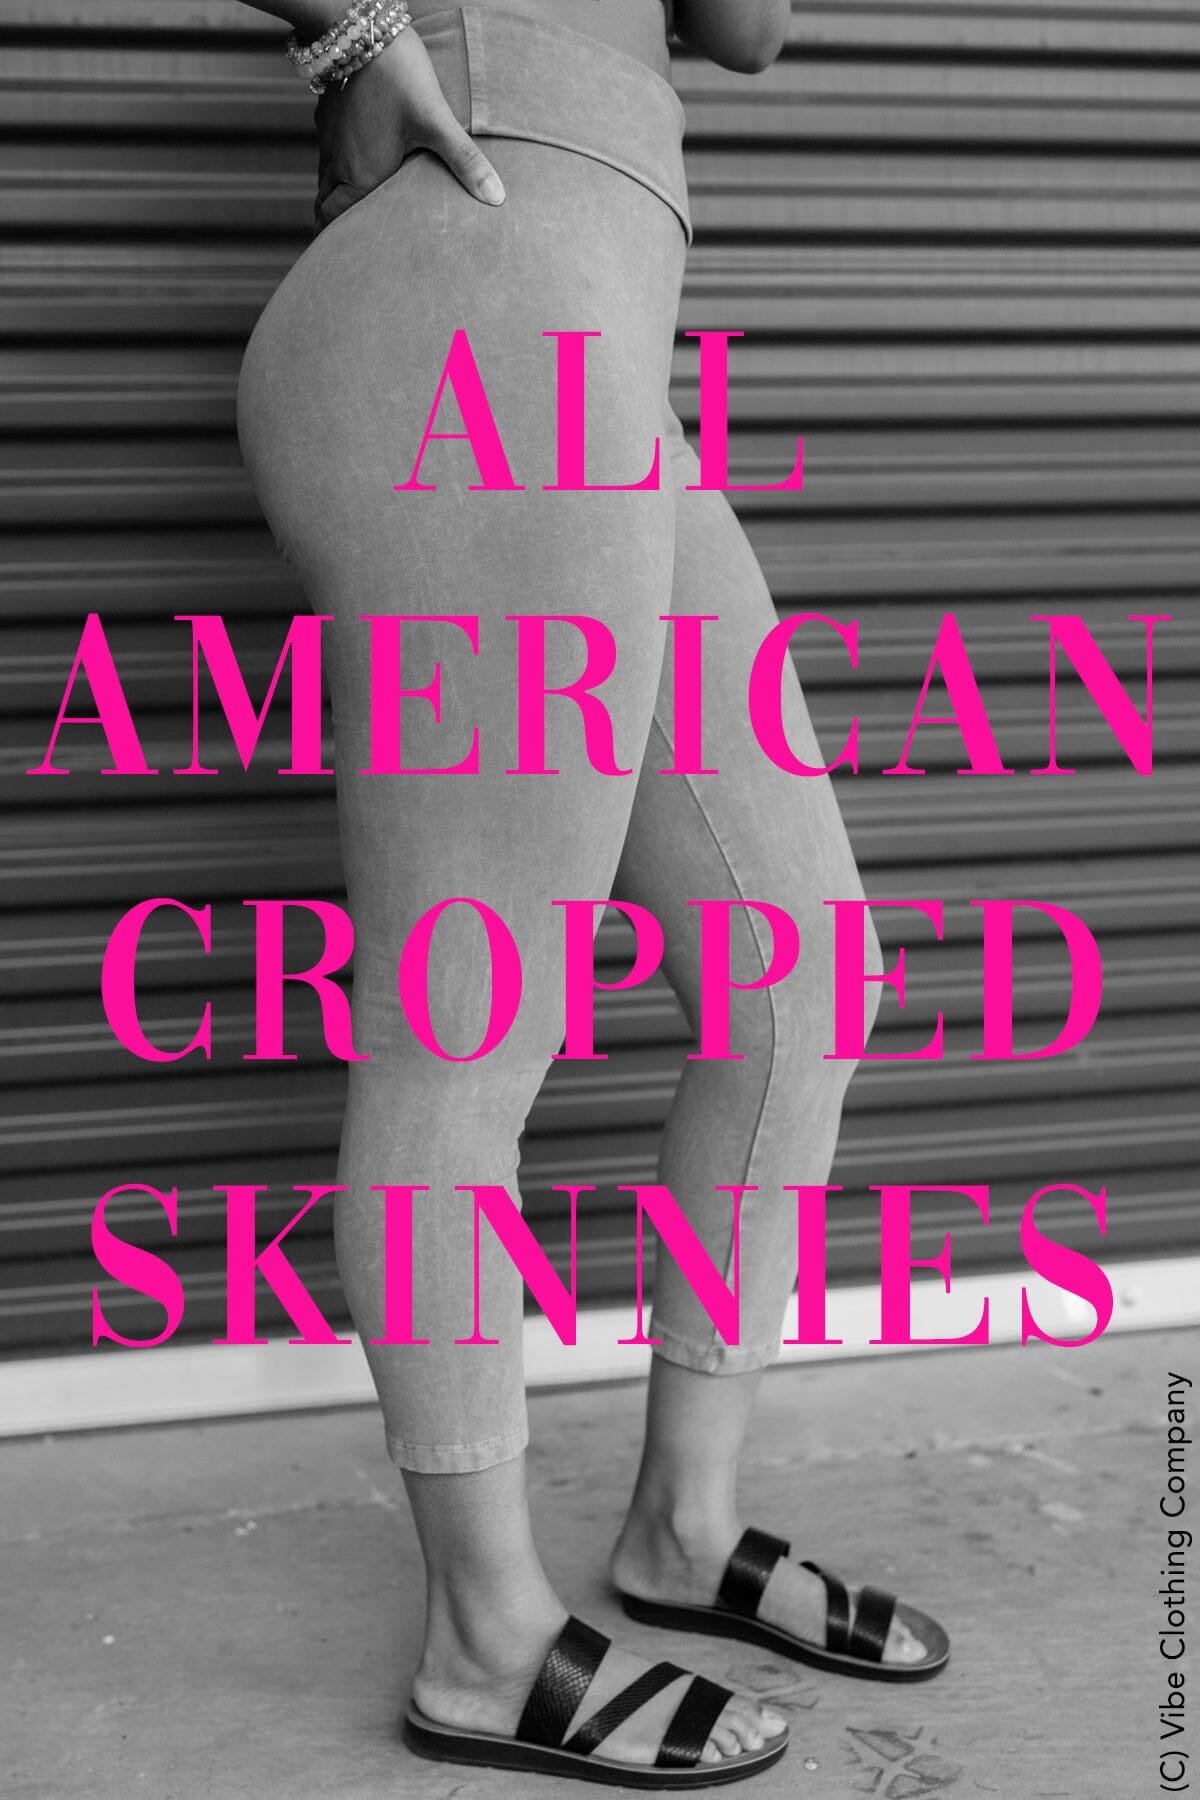 All American Cropped Skinnies - Group Bottoms chatoyant 